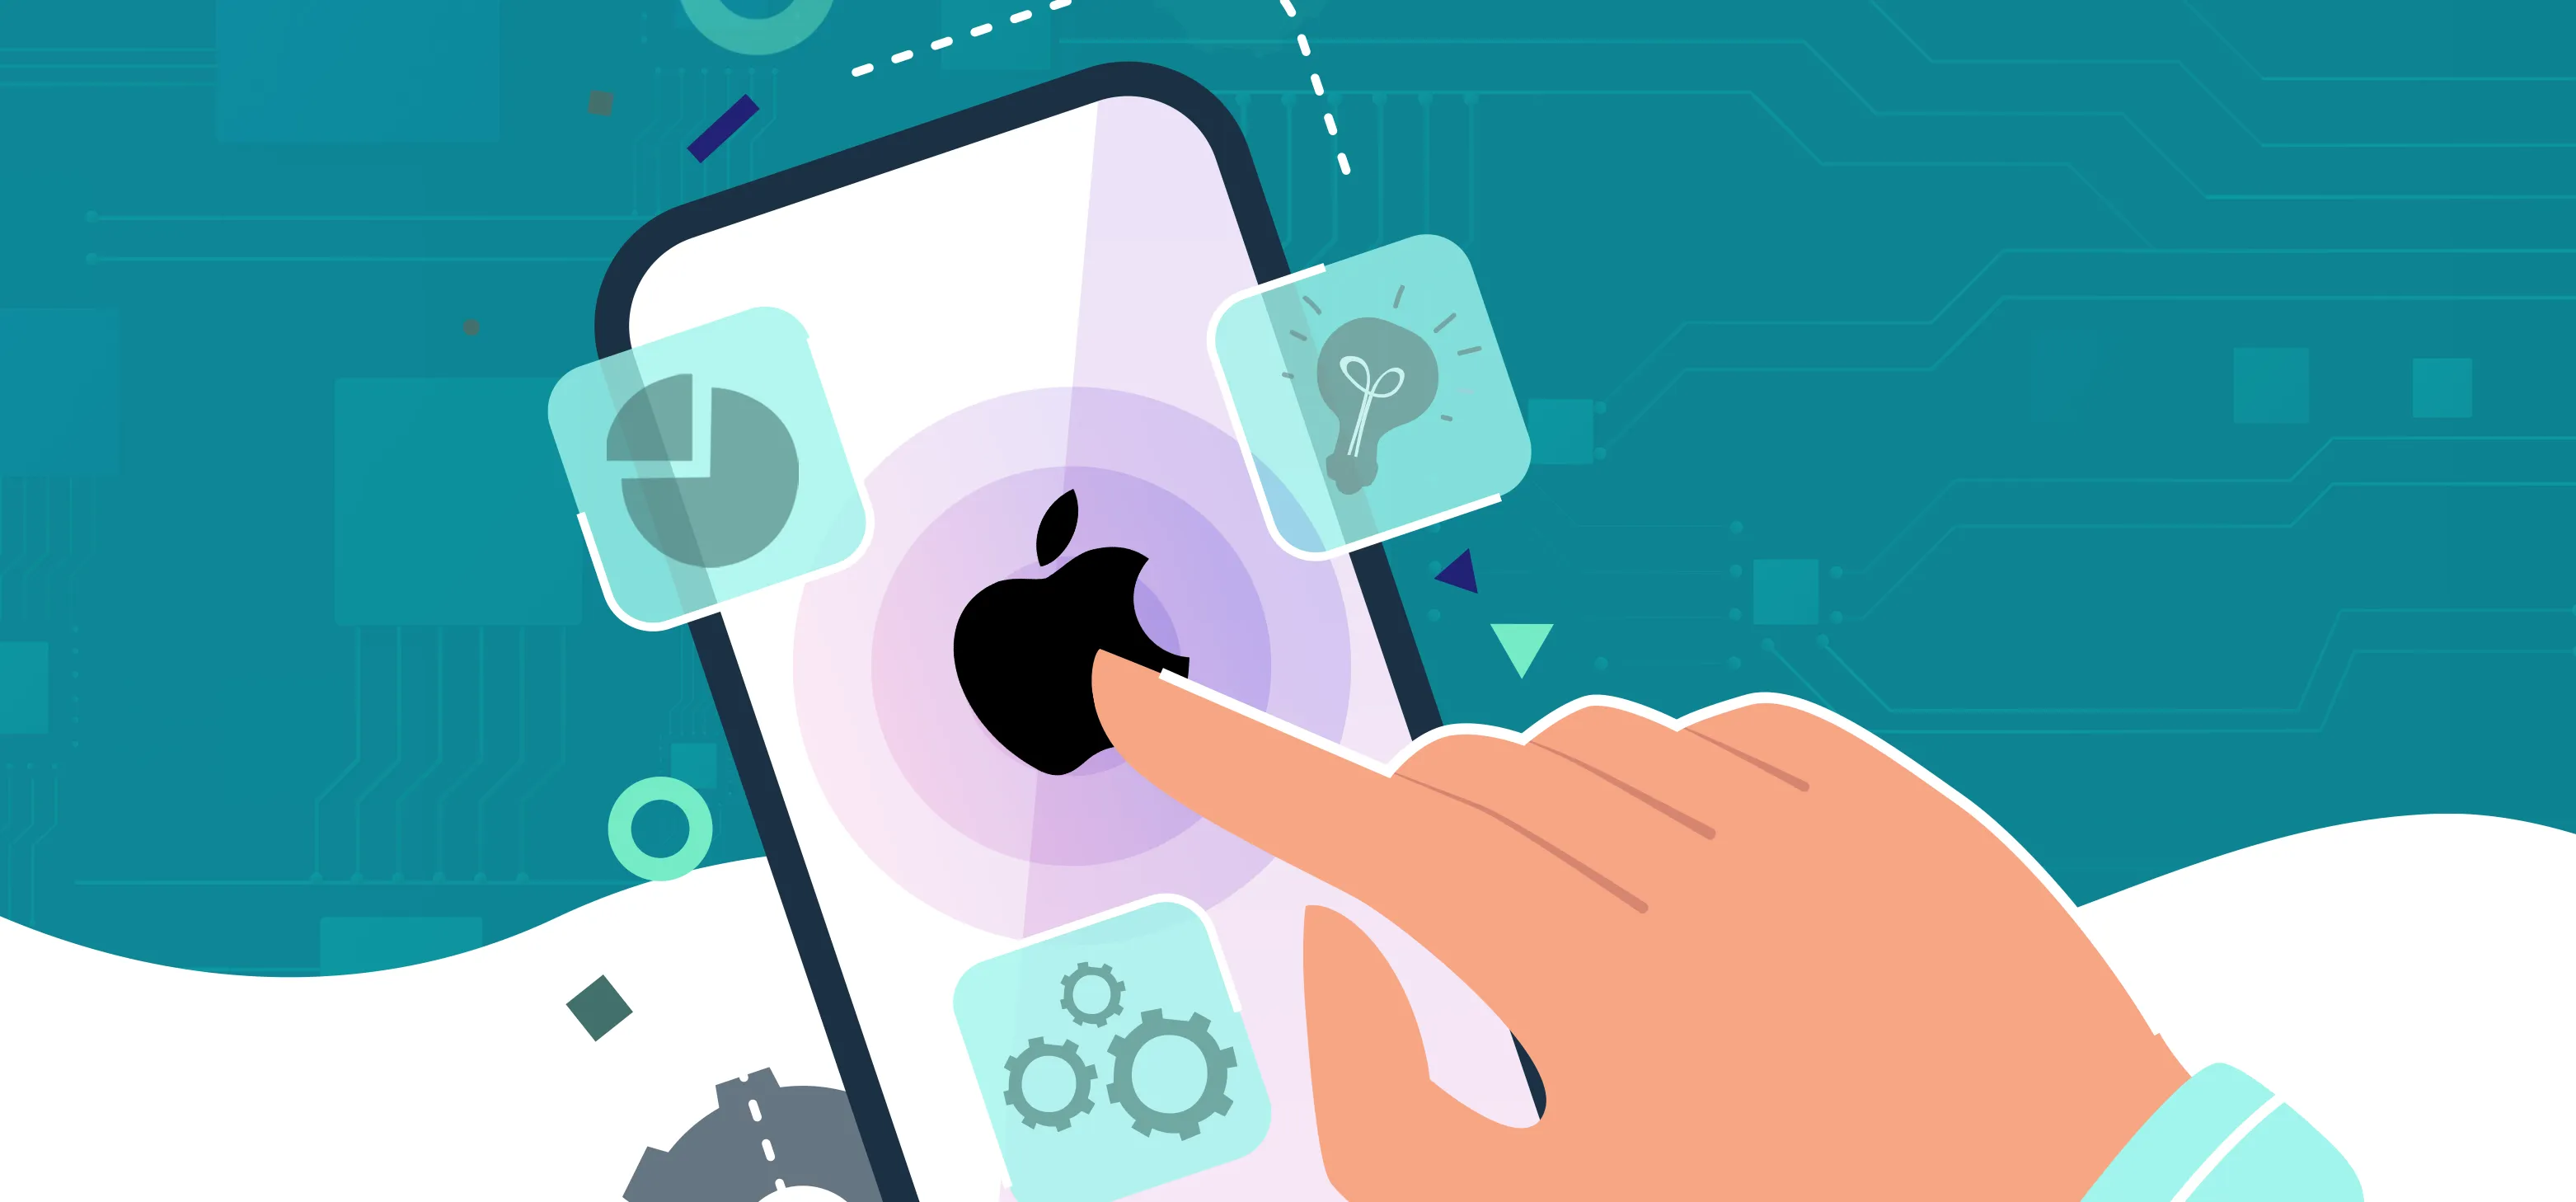 66 Lessons to Learn from Apples Marketing Strategies